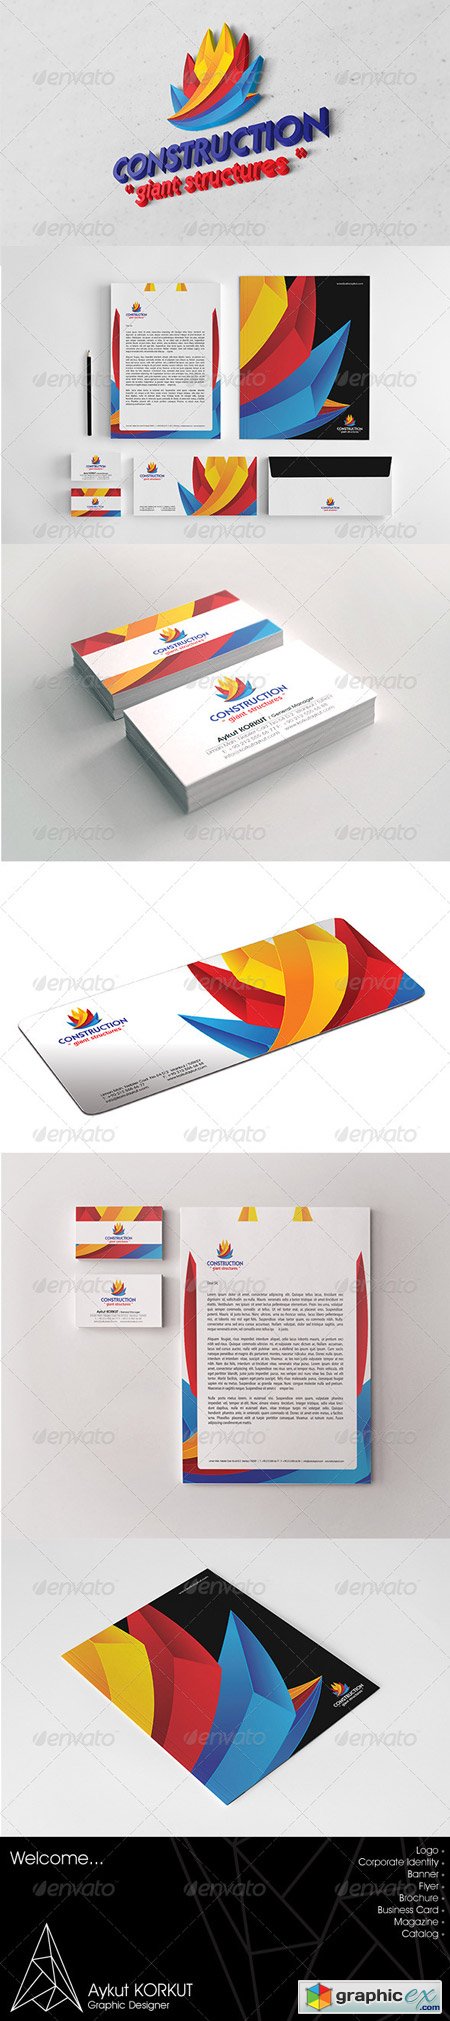 Construction Corporate Identity Package